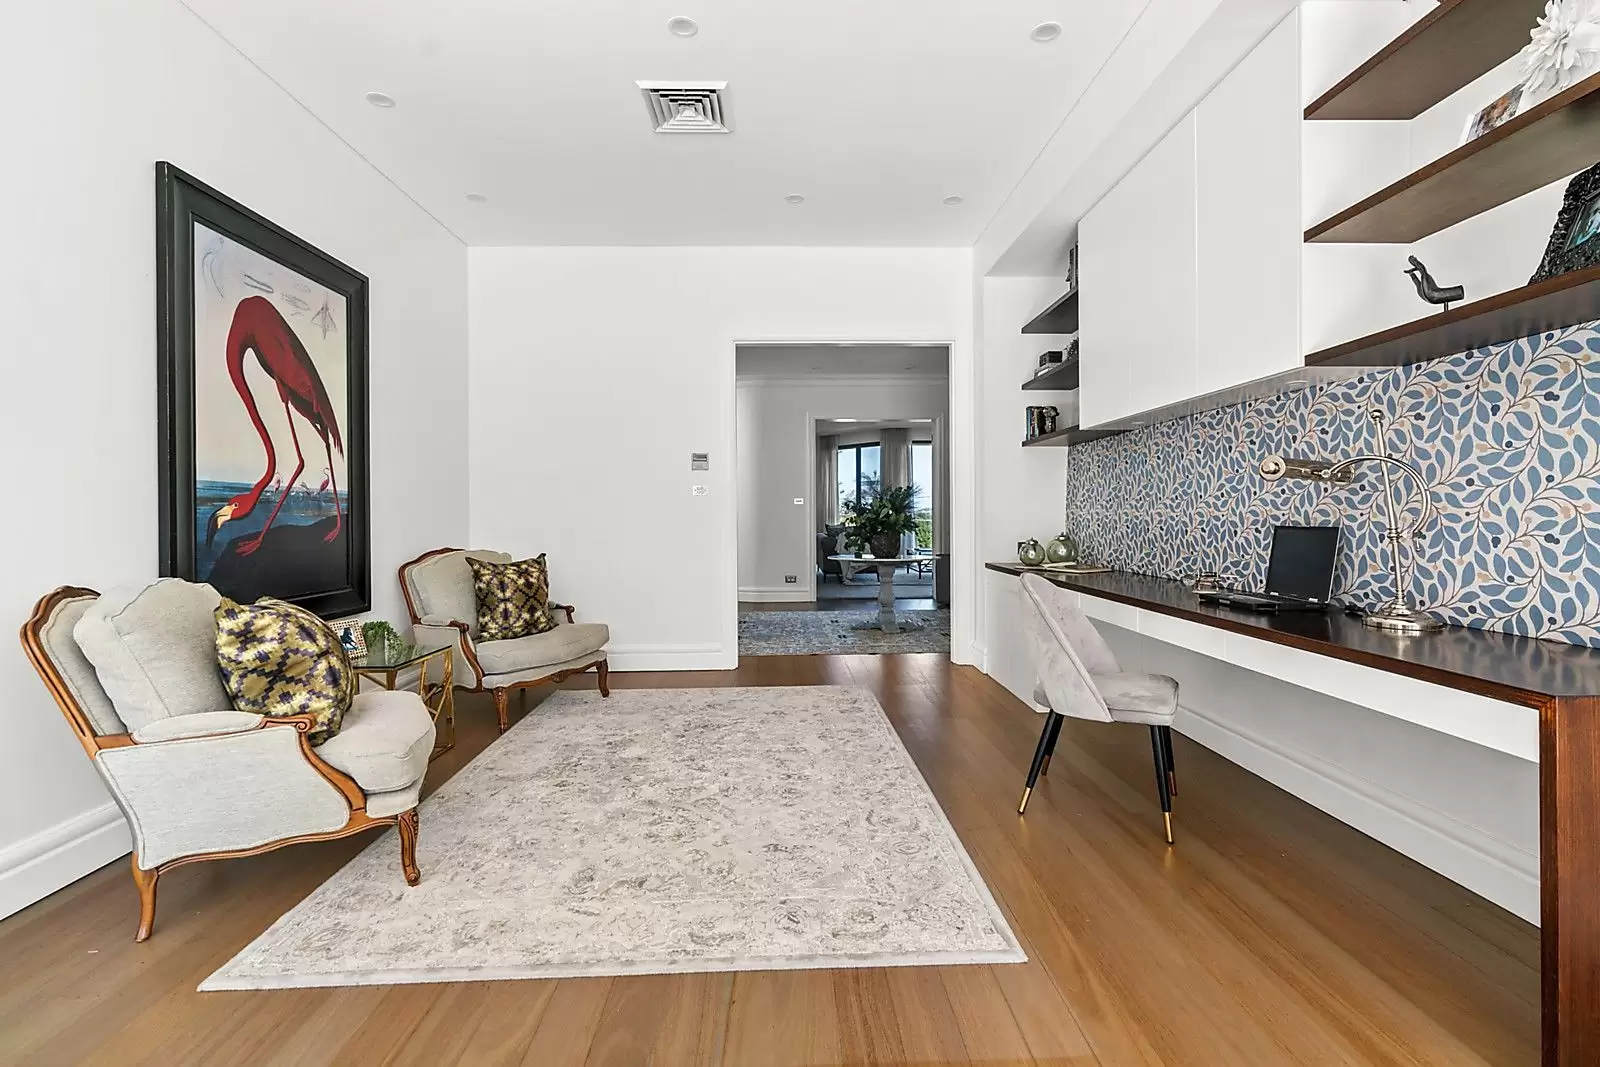 Photo #23: 7 Dalley Avenue, Vaucluse - Sold by Sydney Sotheby's International Realty